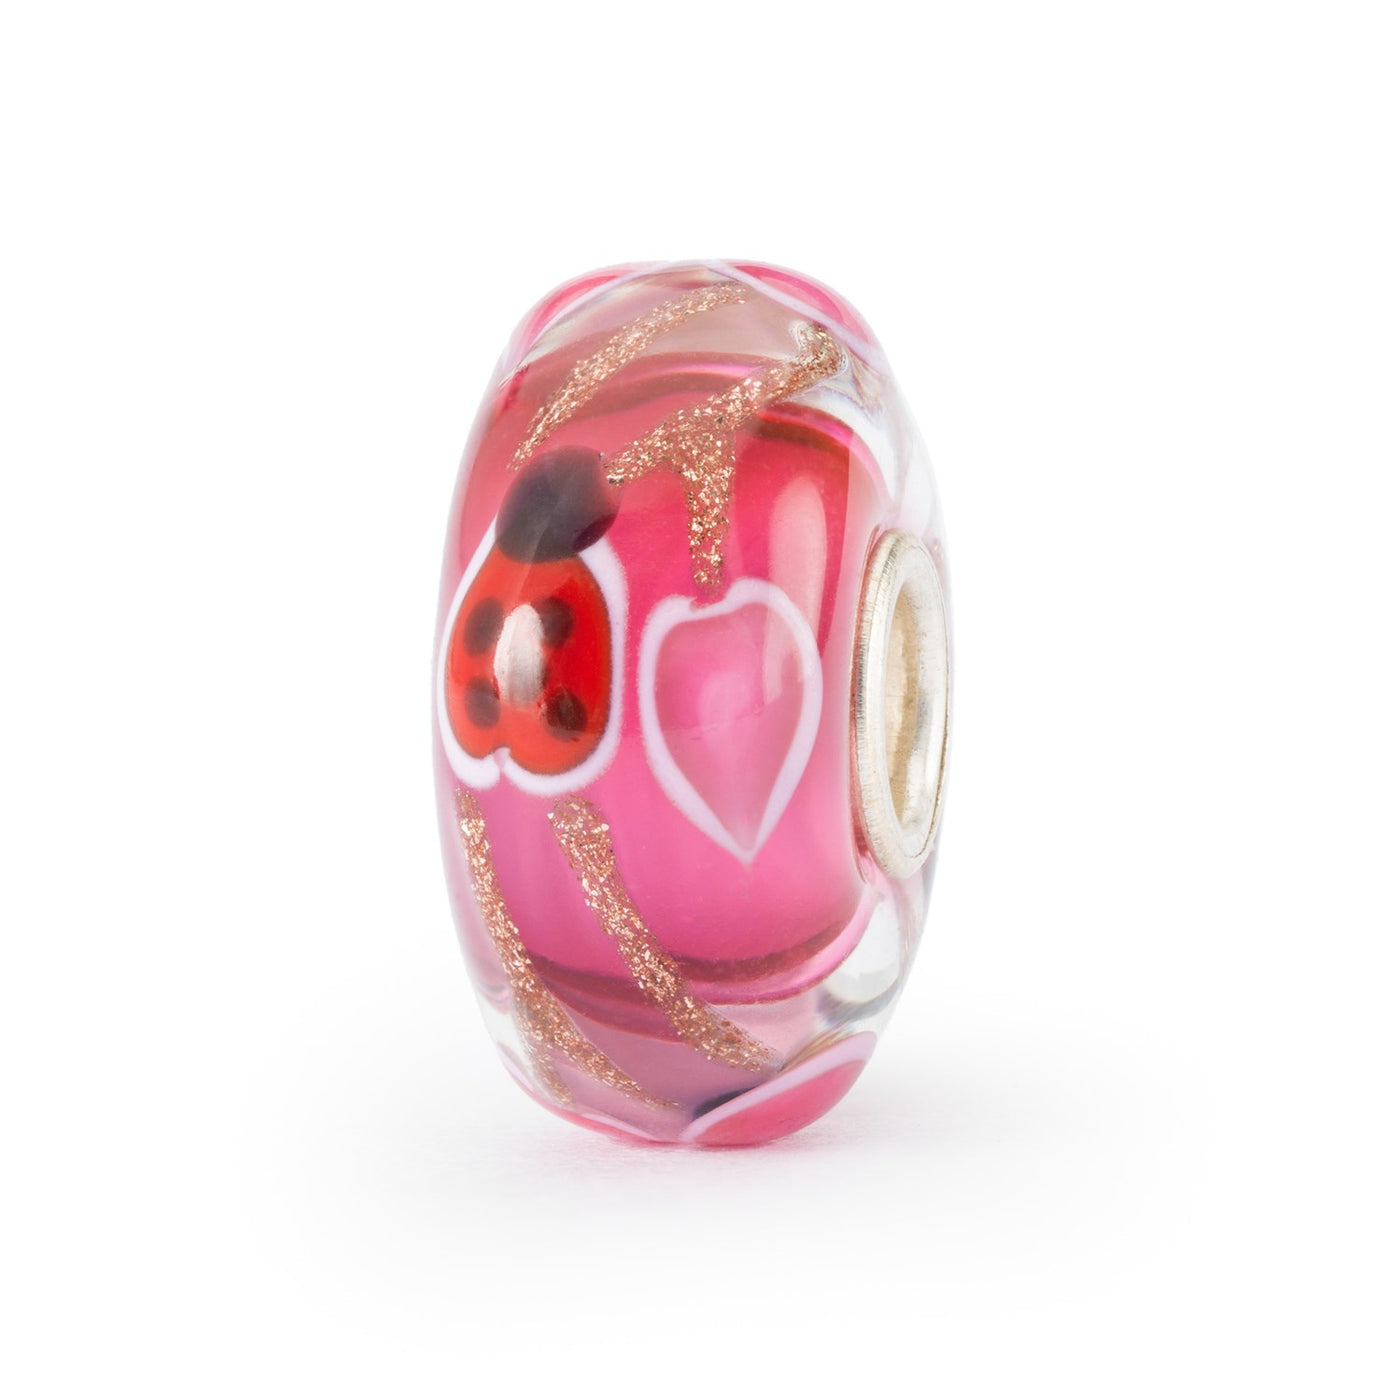 Round glass bead in saturated pink with shades of red is crisscrossed with glittery stripes. Inside are also pink hearts and sweet lady bugs in red and black, with a fine white stroke.